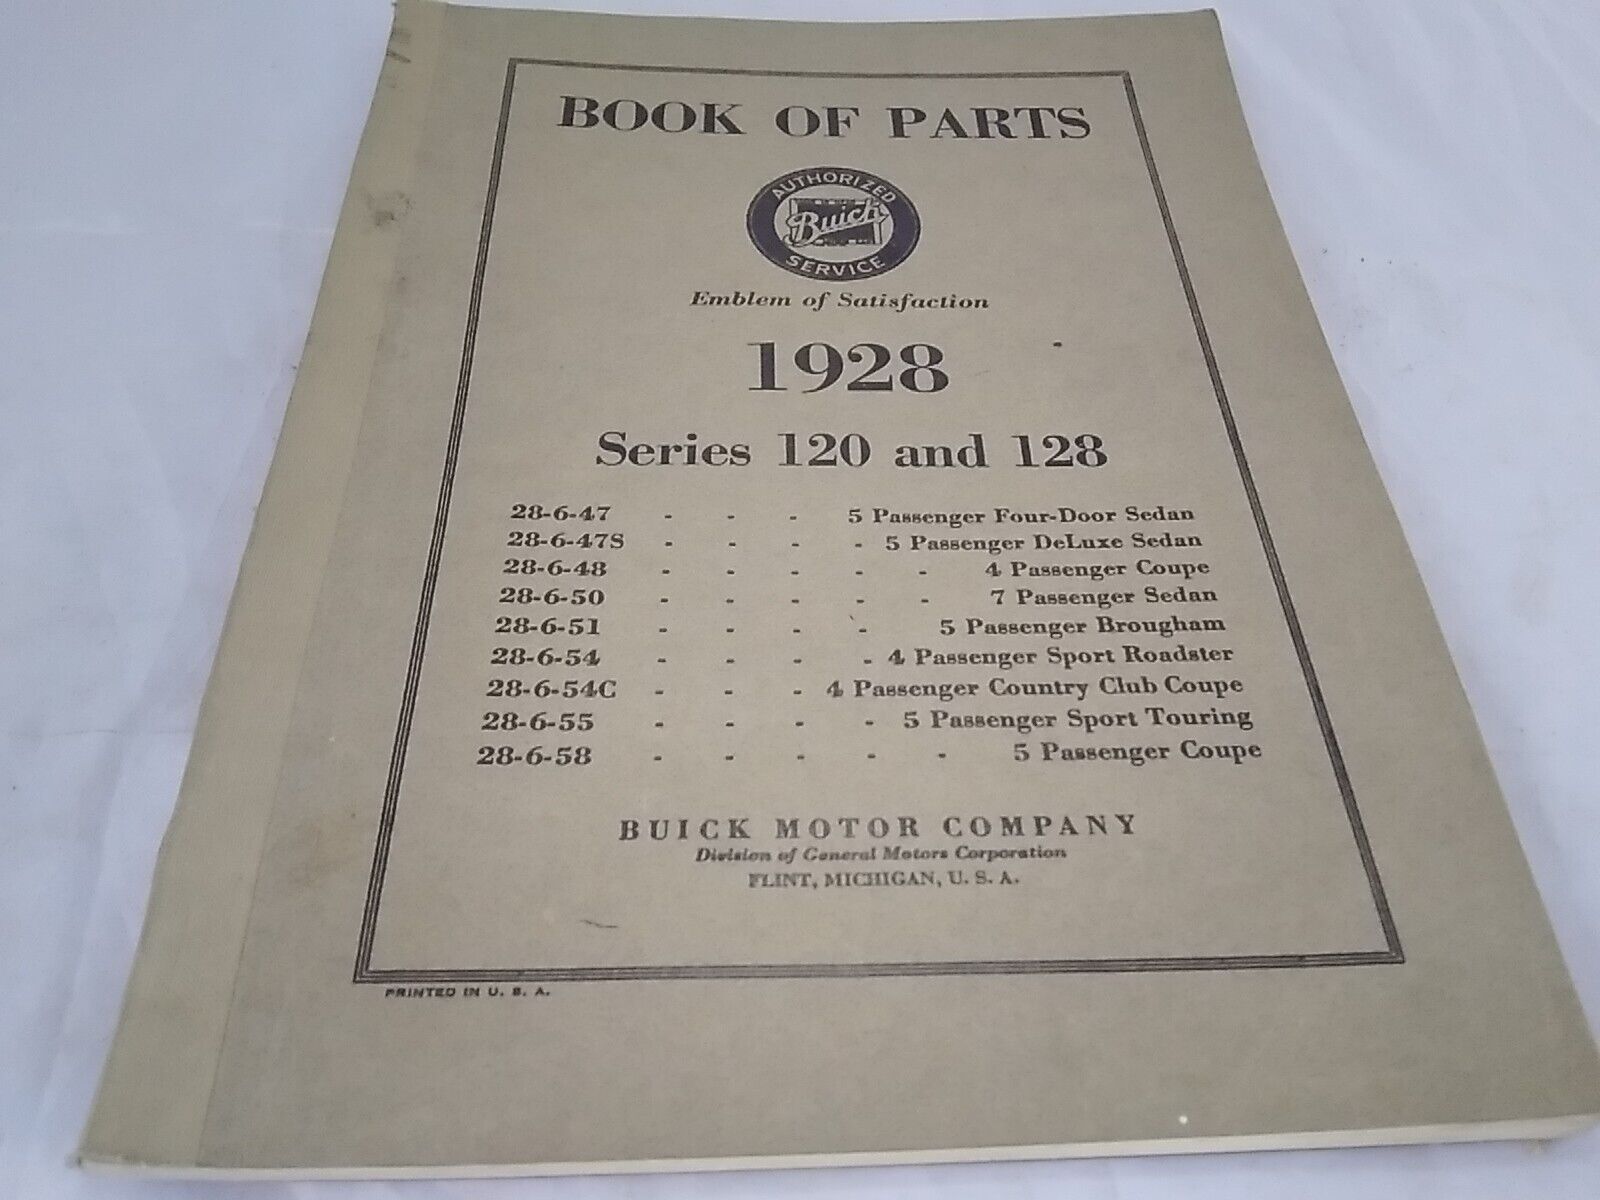 Vintage 1928 Buick Motor Company Series 120 And 128 Book Of Parts